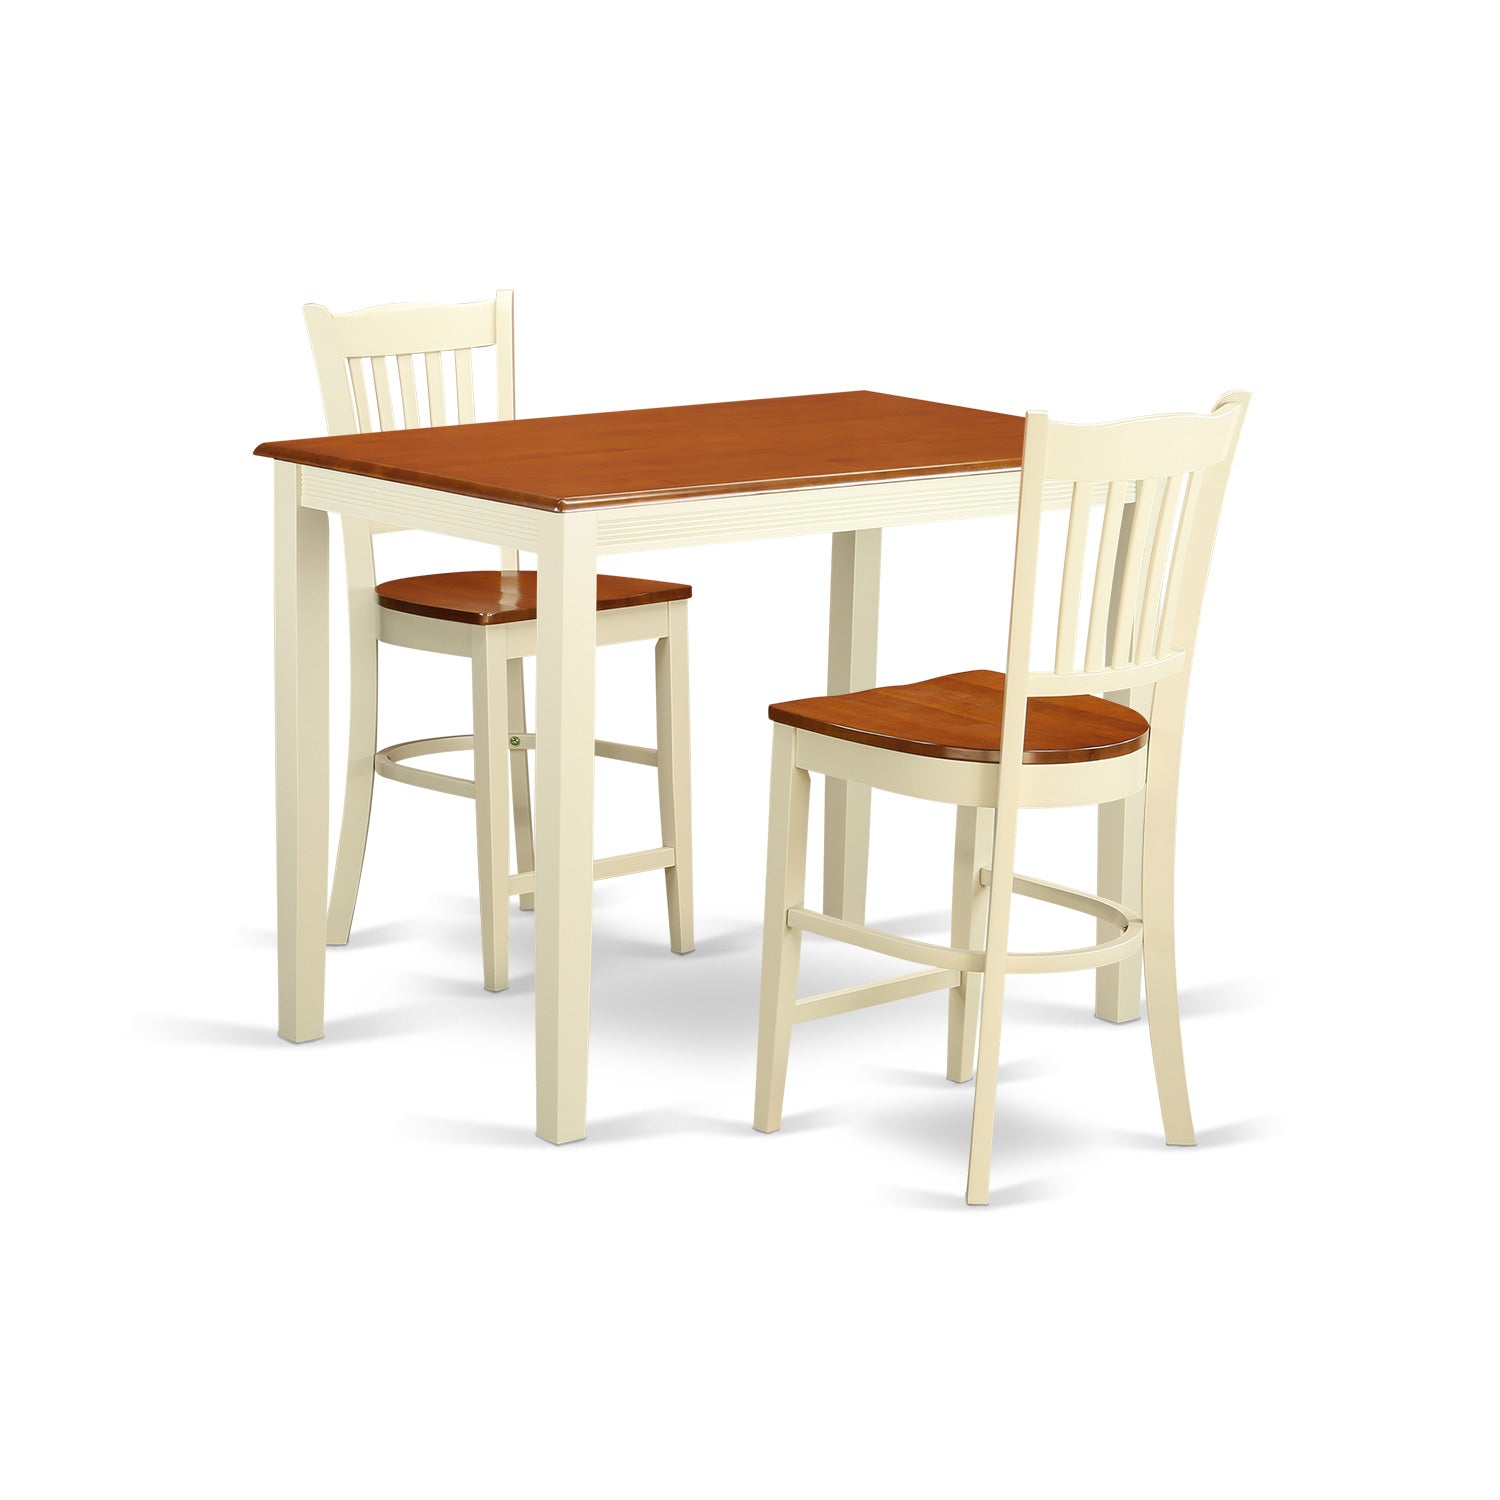 3 Pc Counter Height Dining Table and 2 Kitchen Chairs In Buttermilk